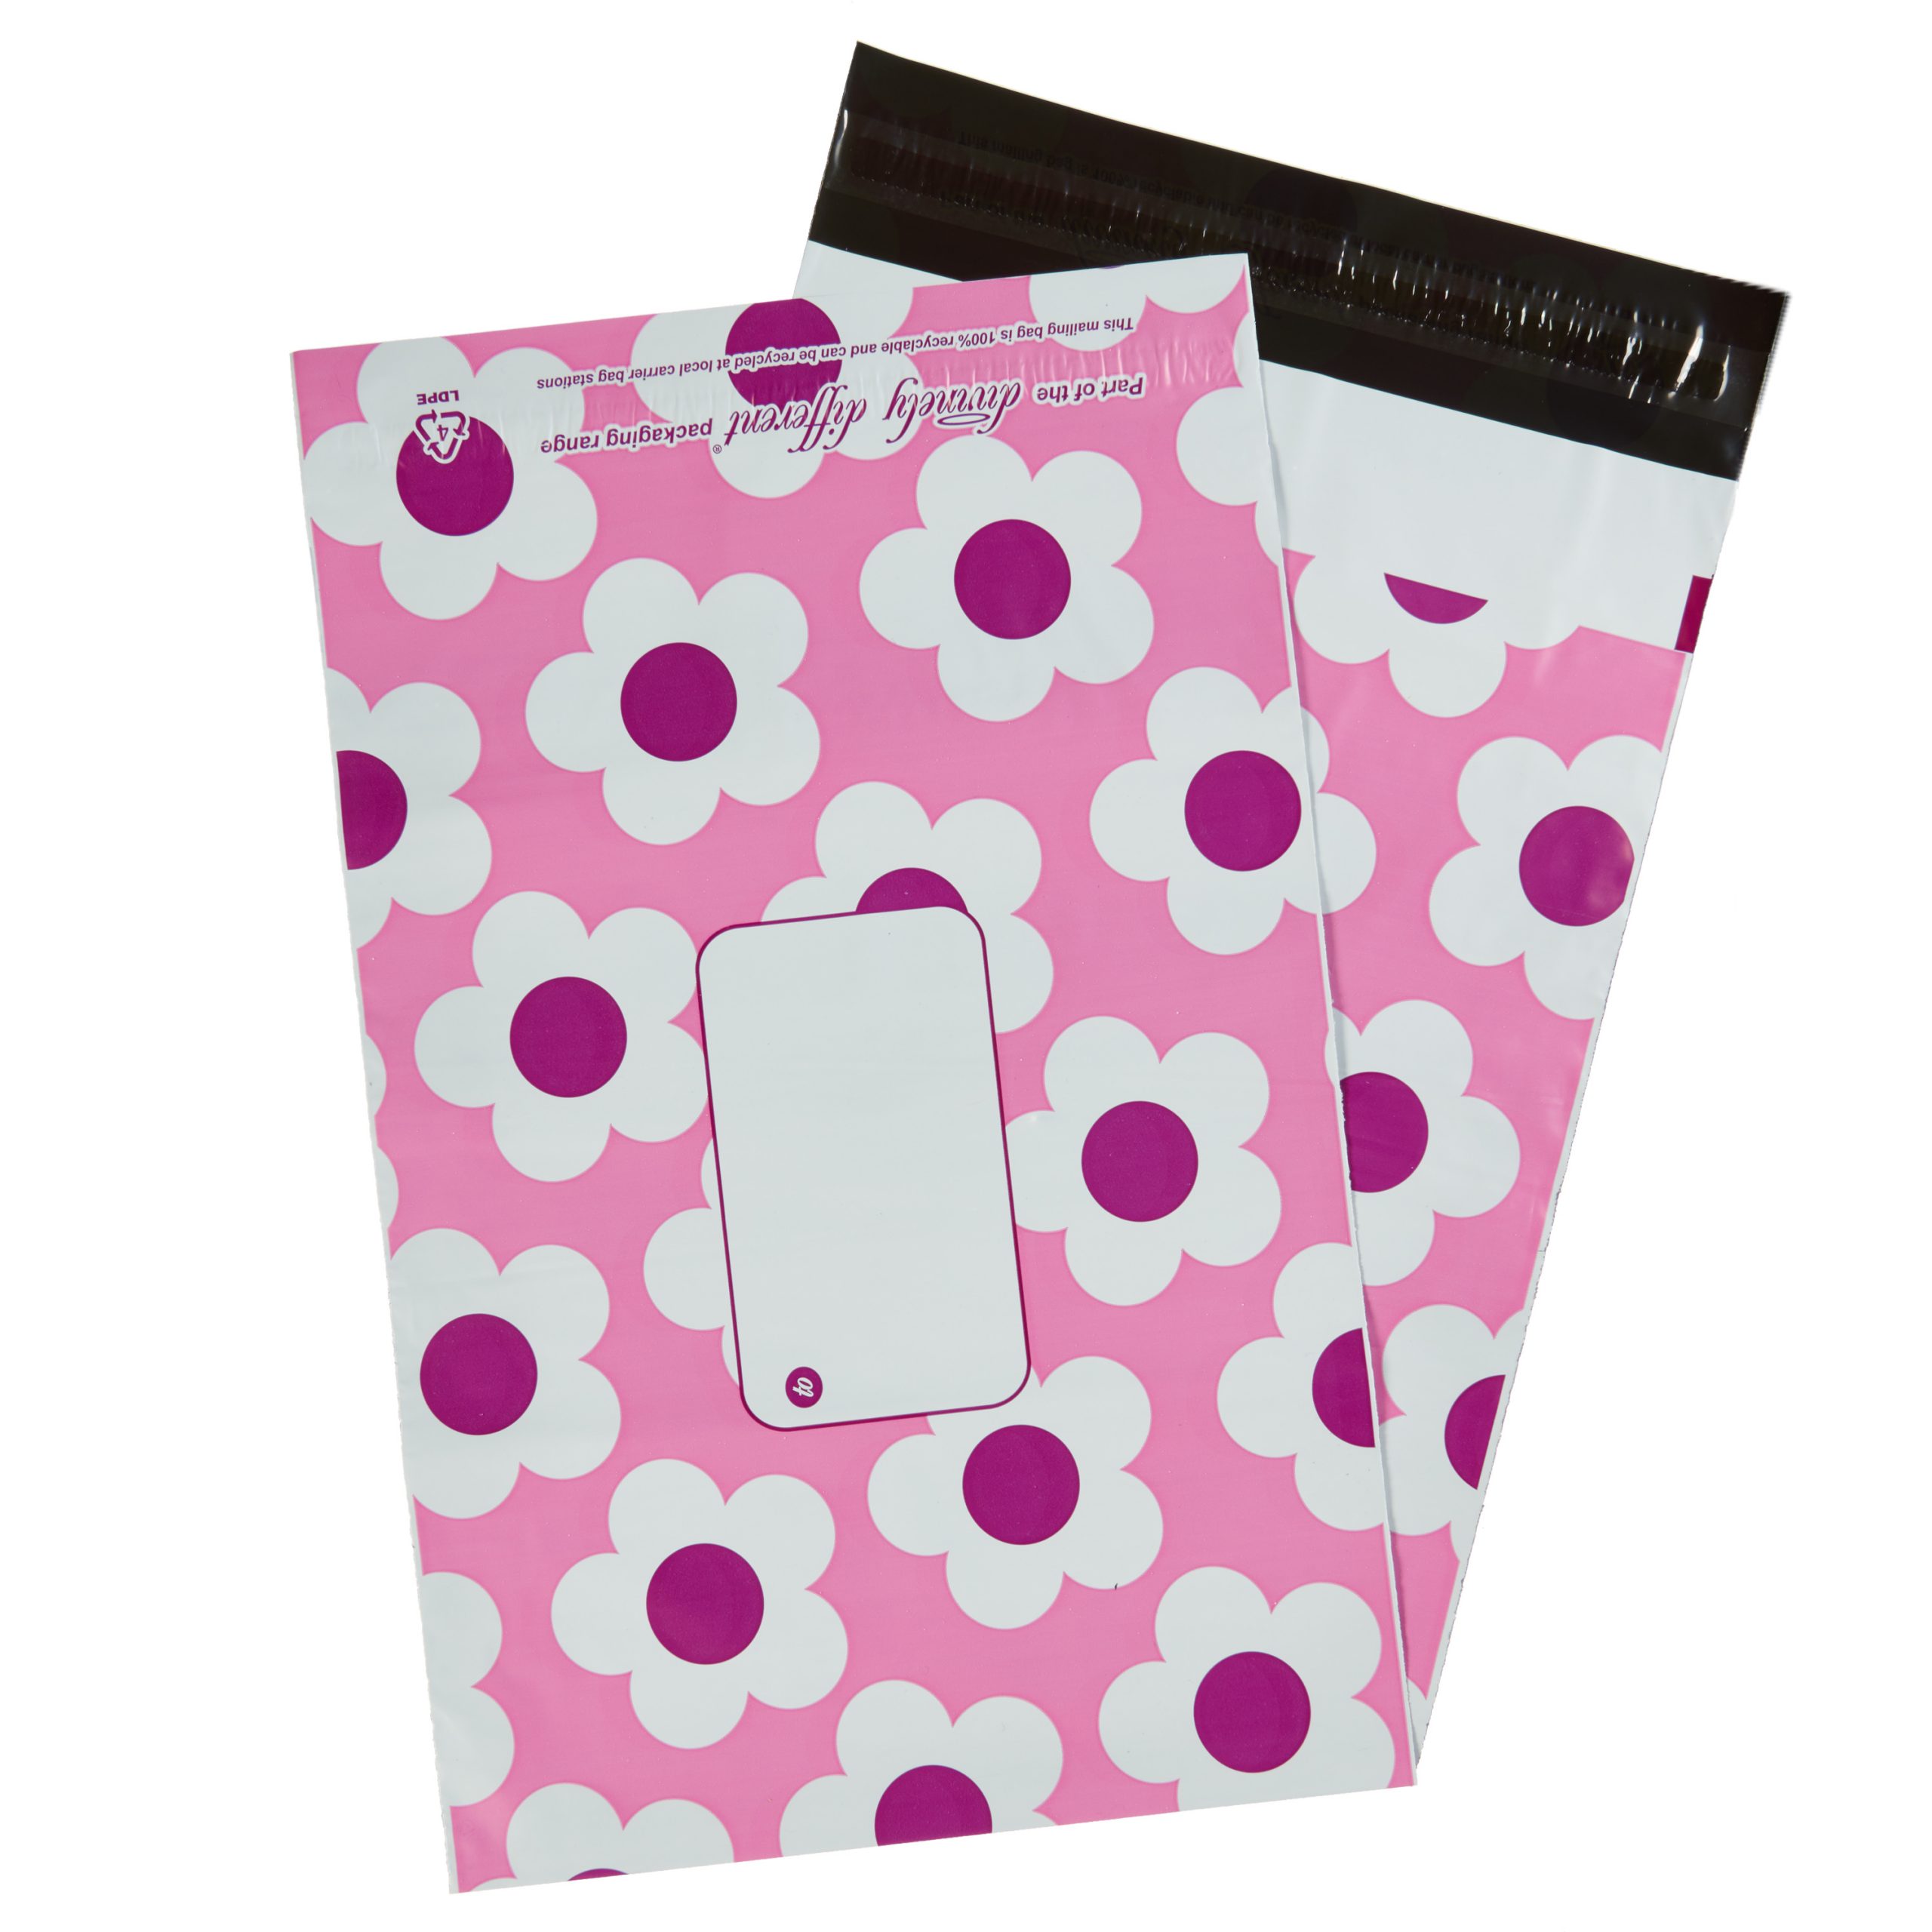 PINK MIX PACK Post Postal Plastic Poly Mailing Bags Printed Polka Dot Floral 